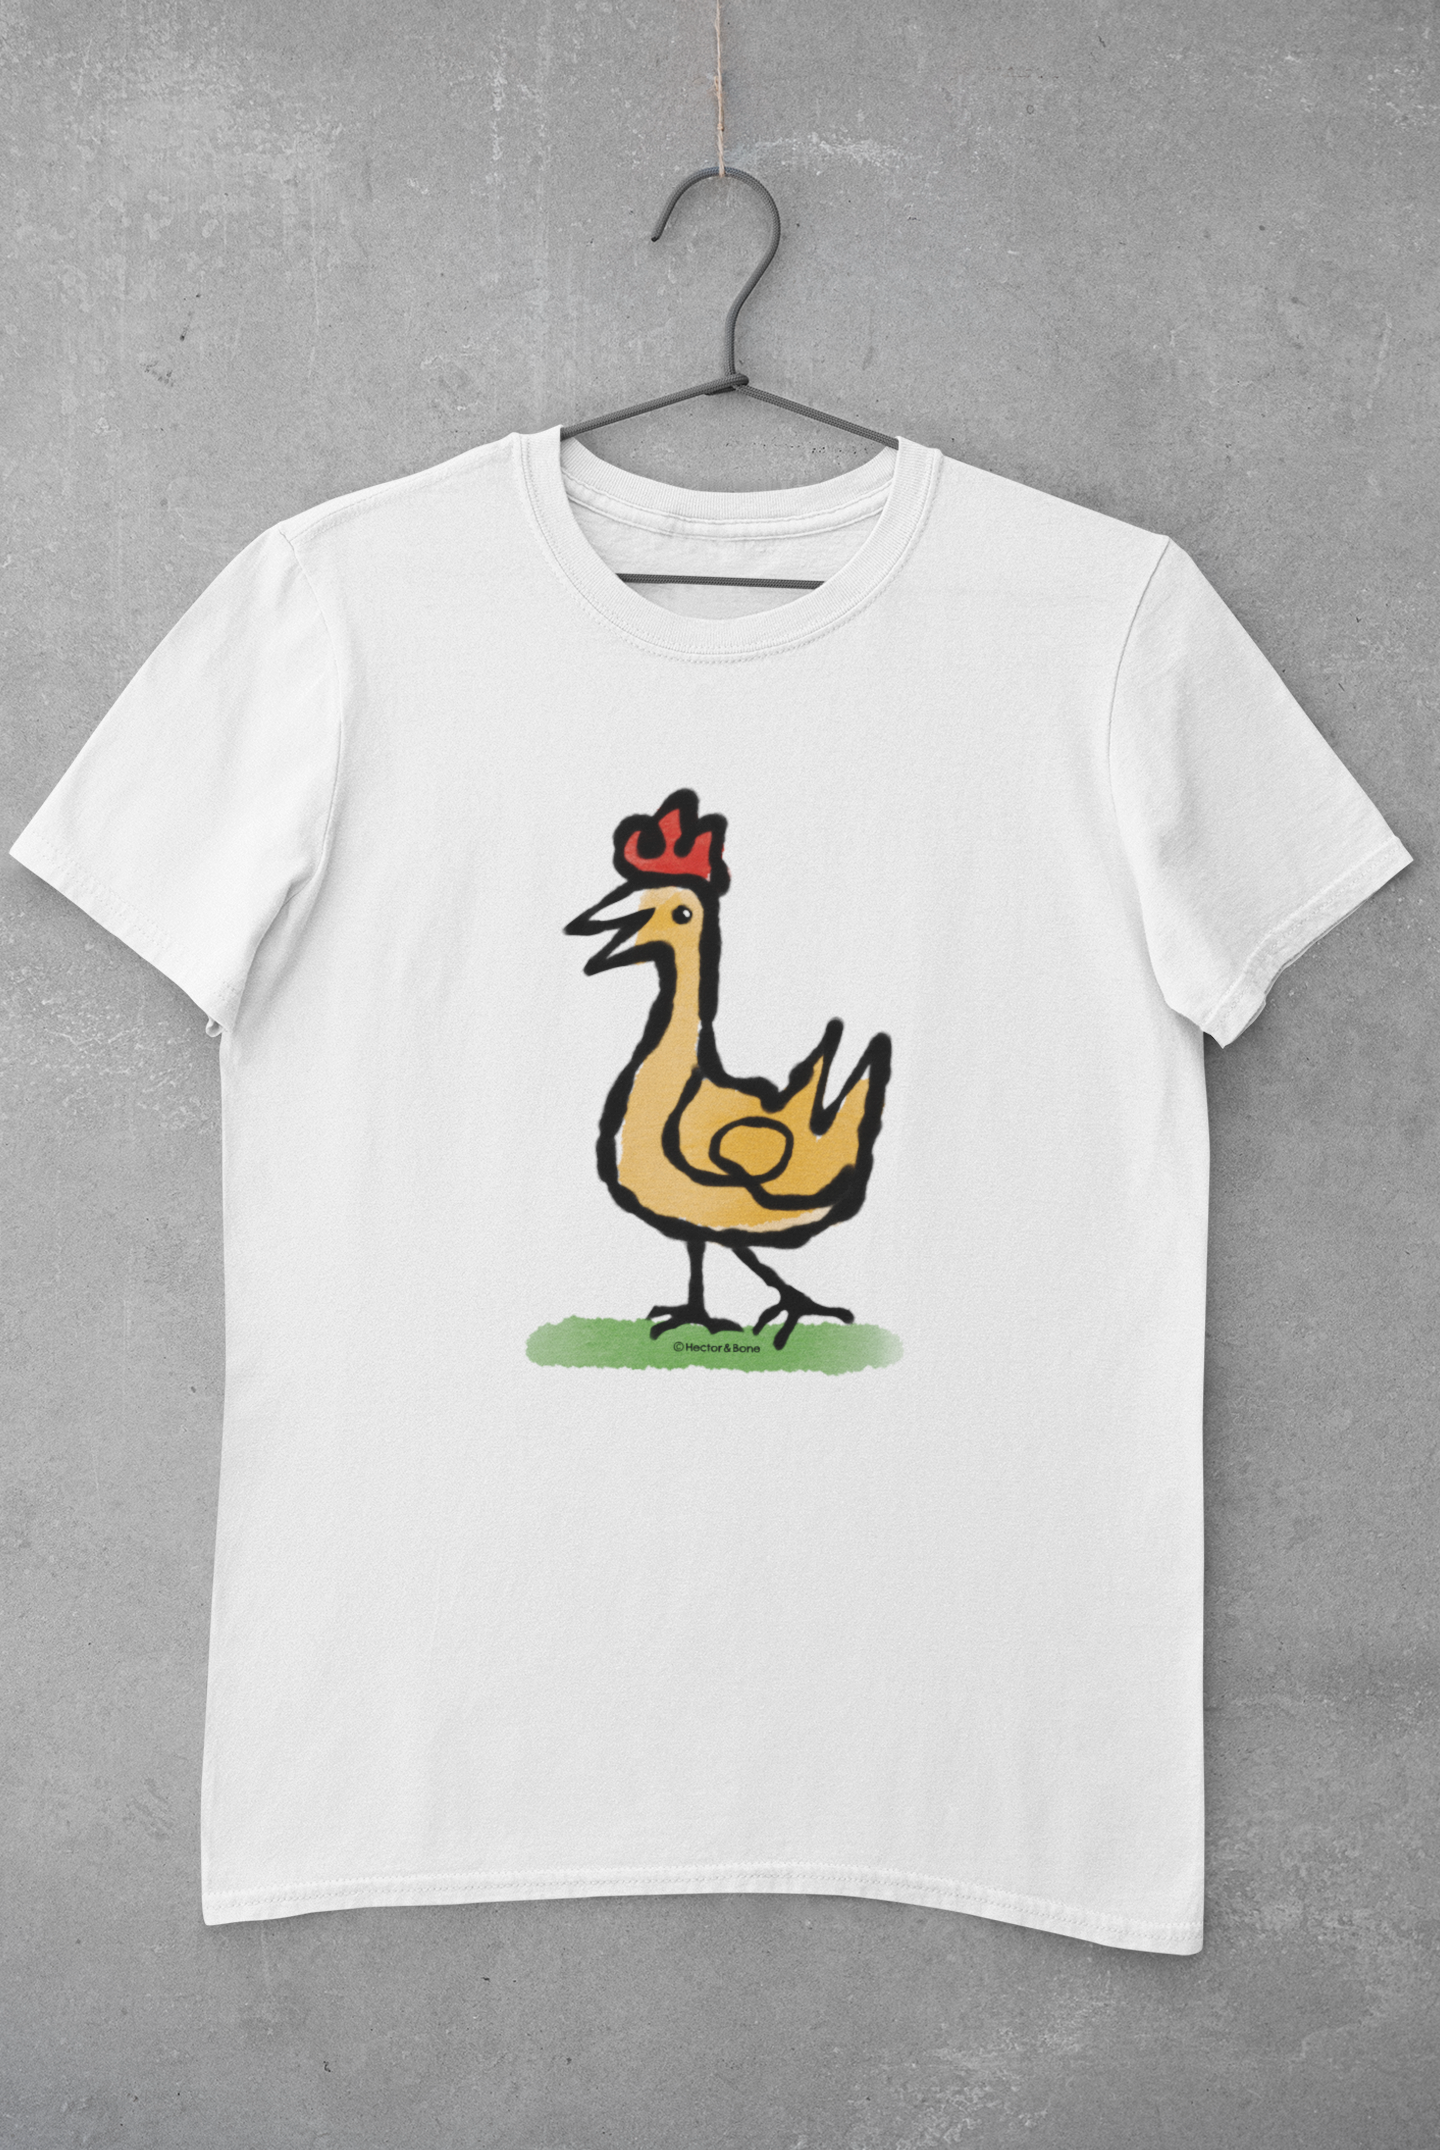 Happy Chicken T-shirt - Illustrated Funny Chicken design on classic white vegan t-shirts by Hector and Bone